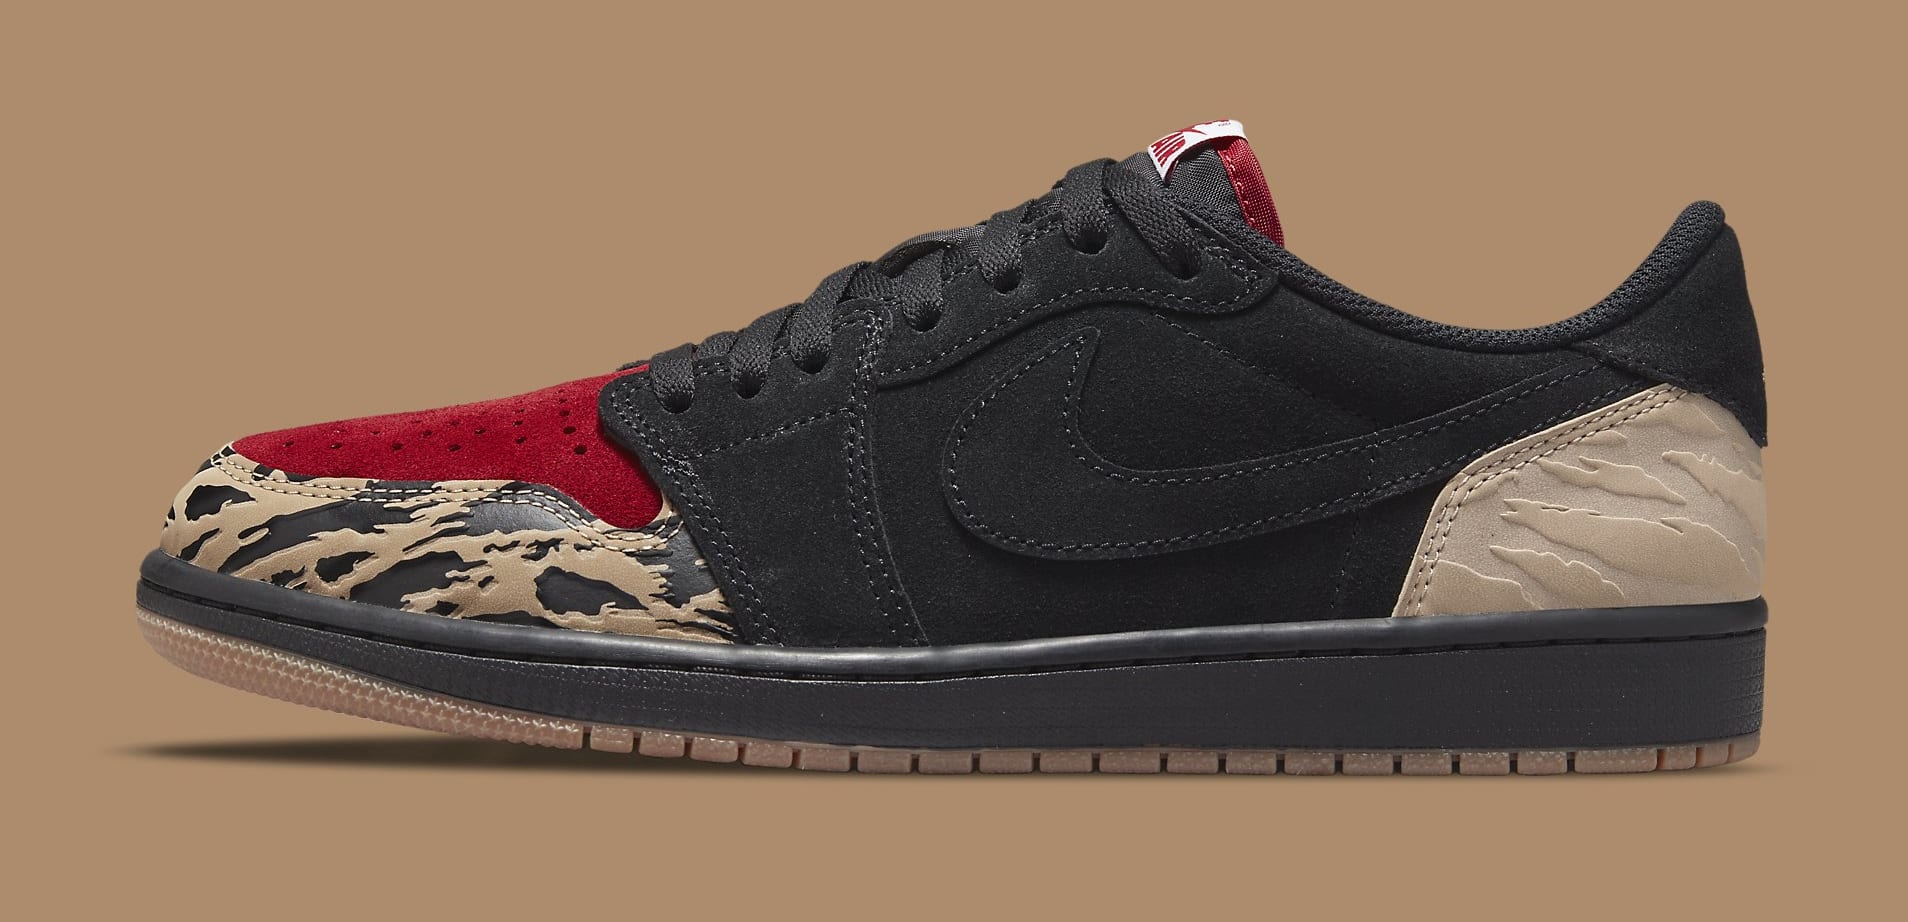 SoleFly x Air Jordan 1 Low Collab Release Date DN3400 001 | Sole 